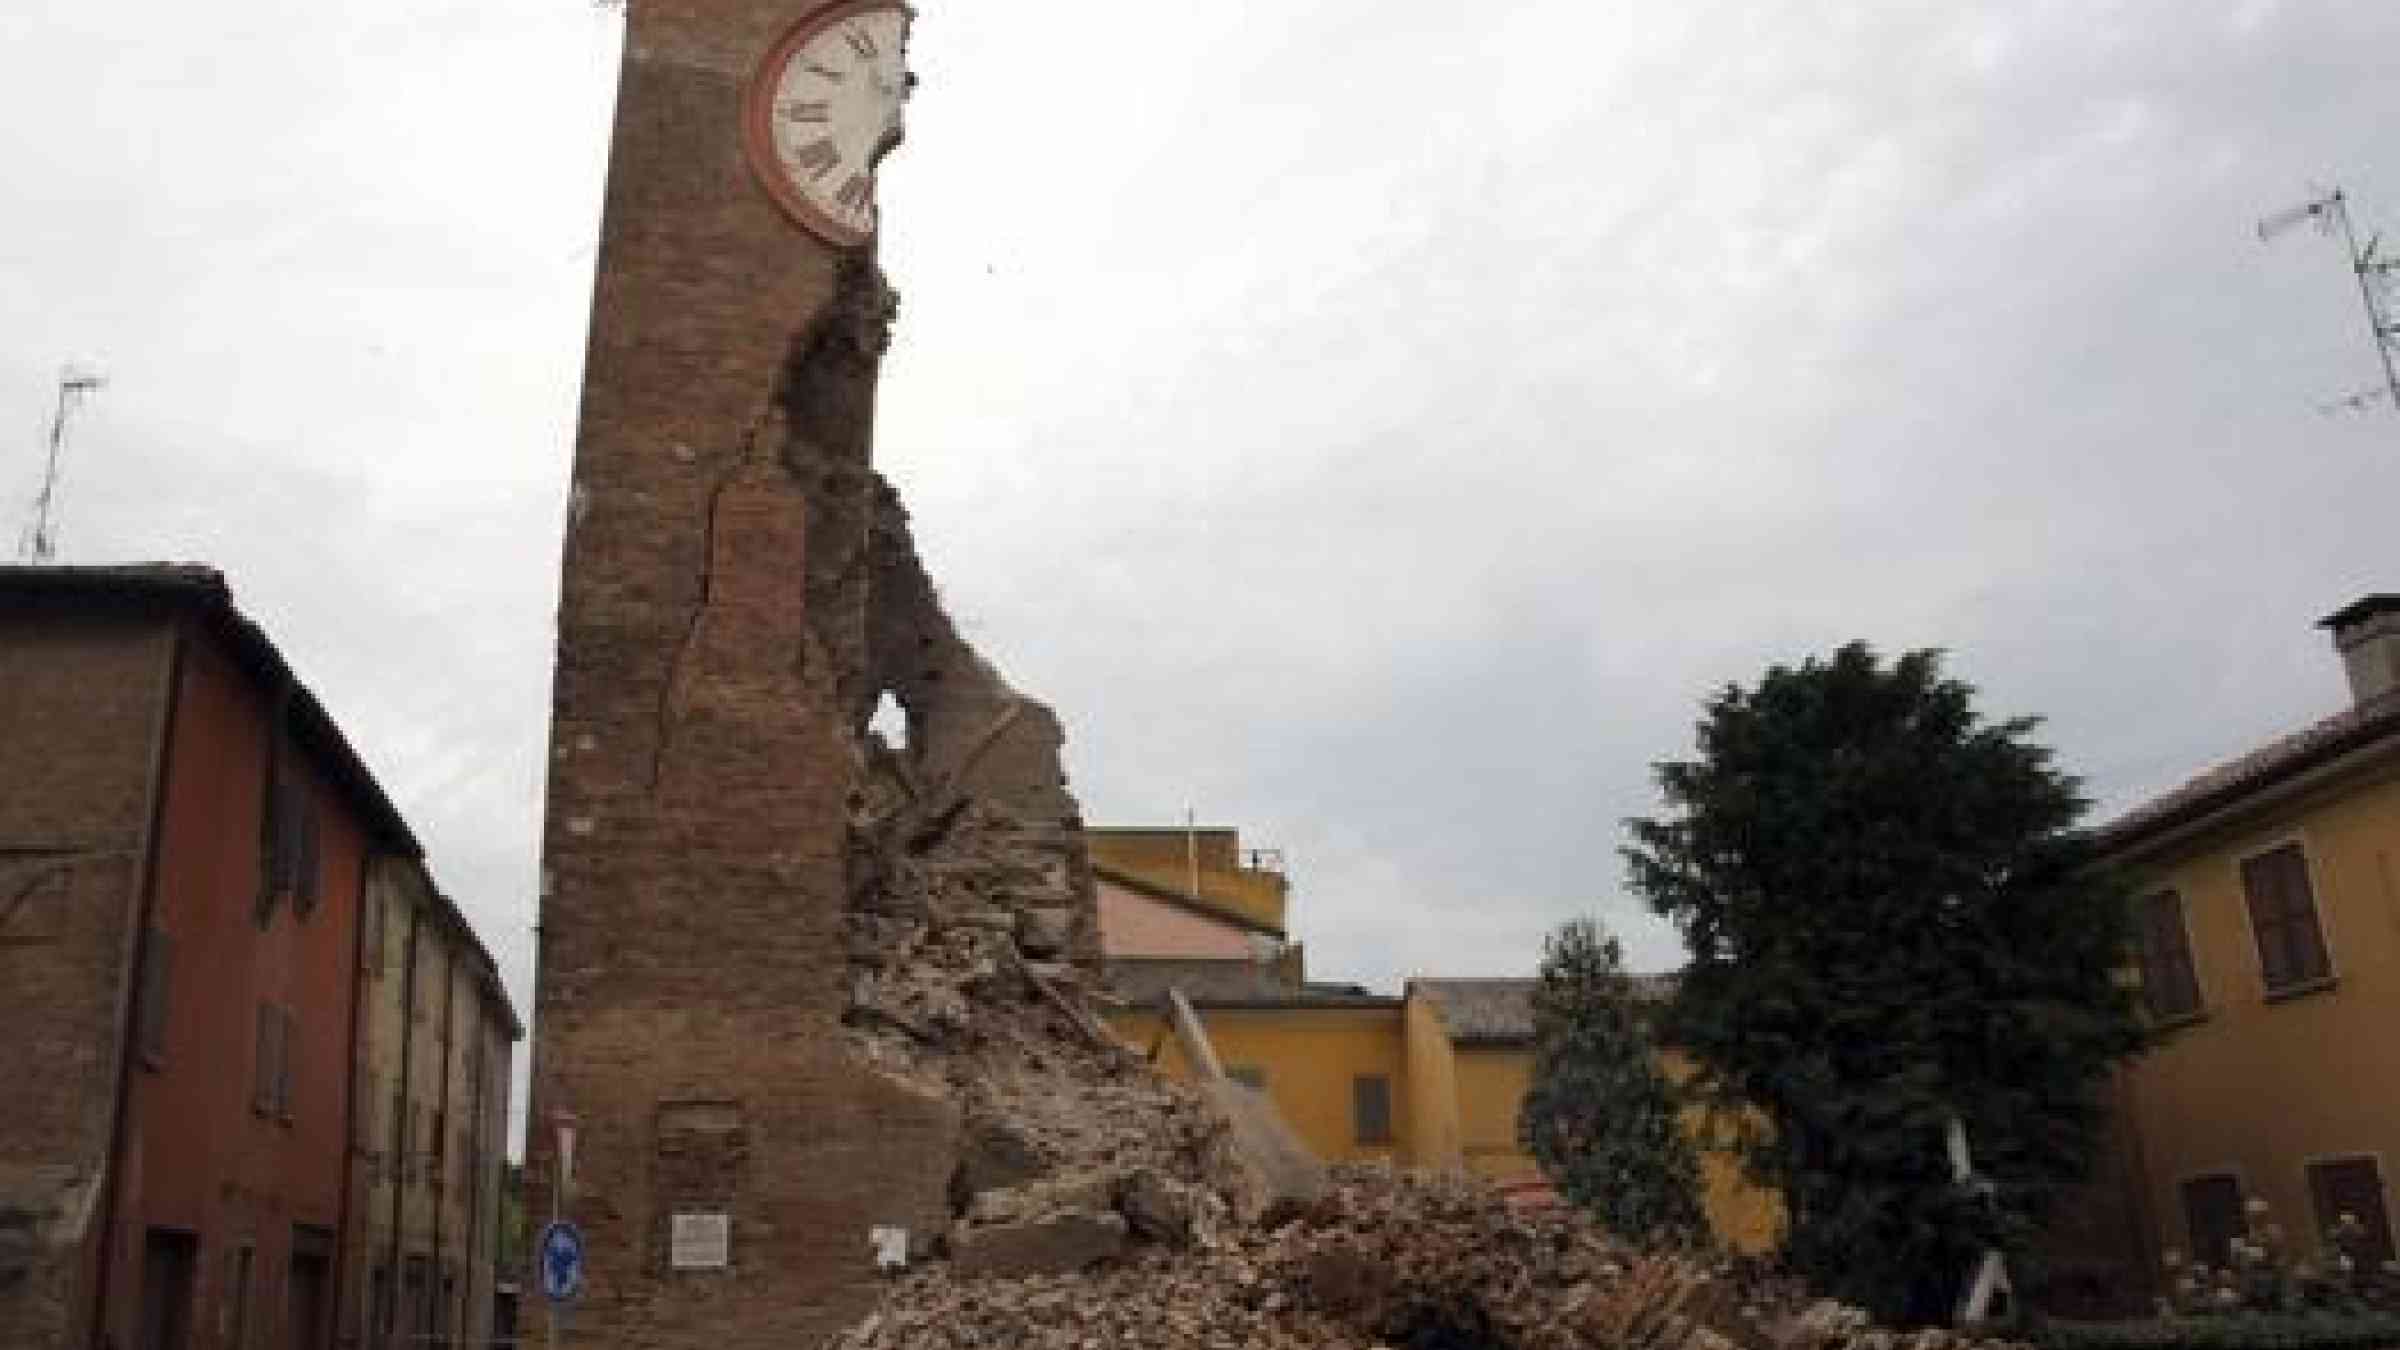 Ruins of the destroyed Clock Tower after an earthquake in northern Italy